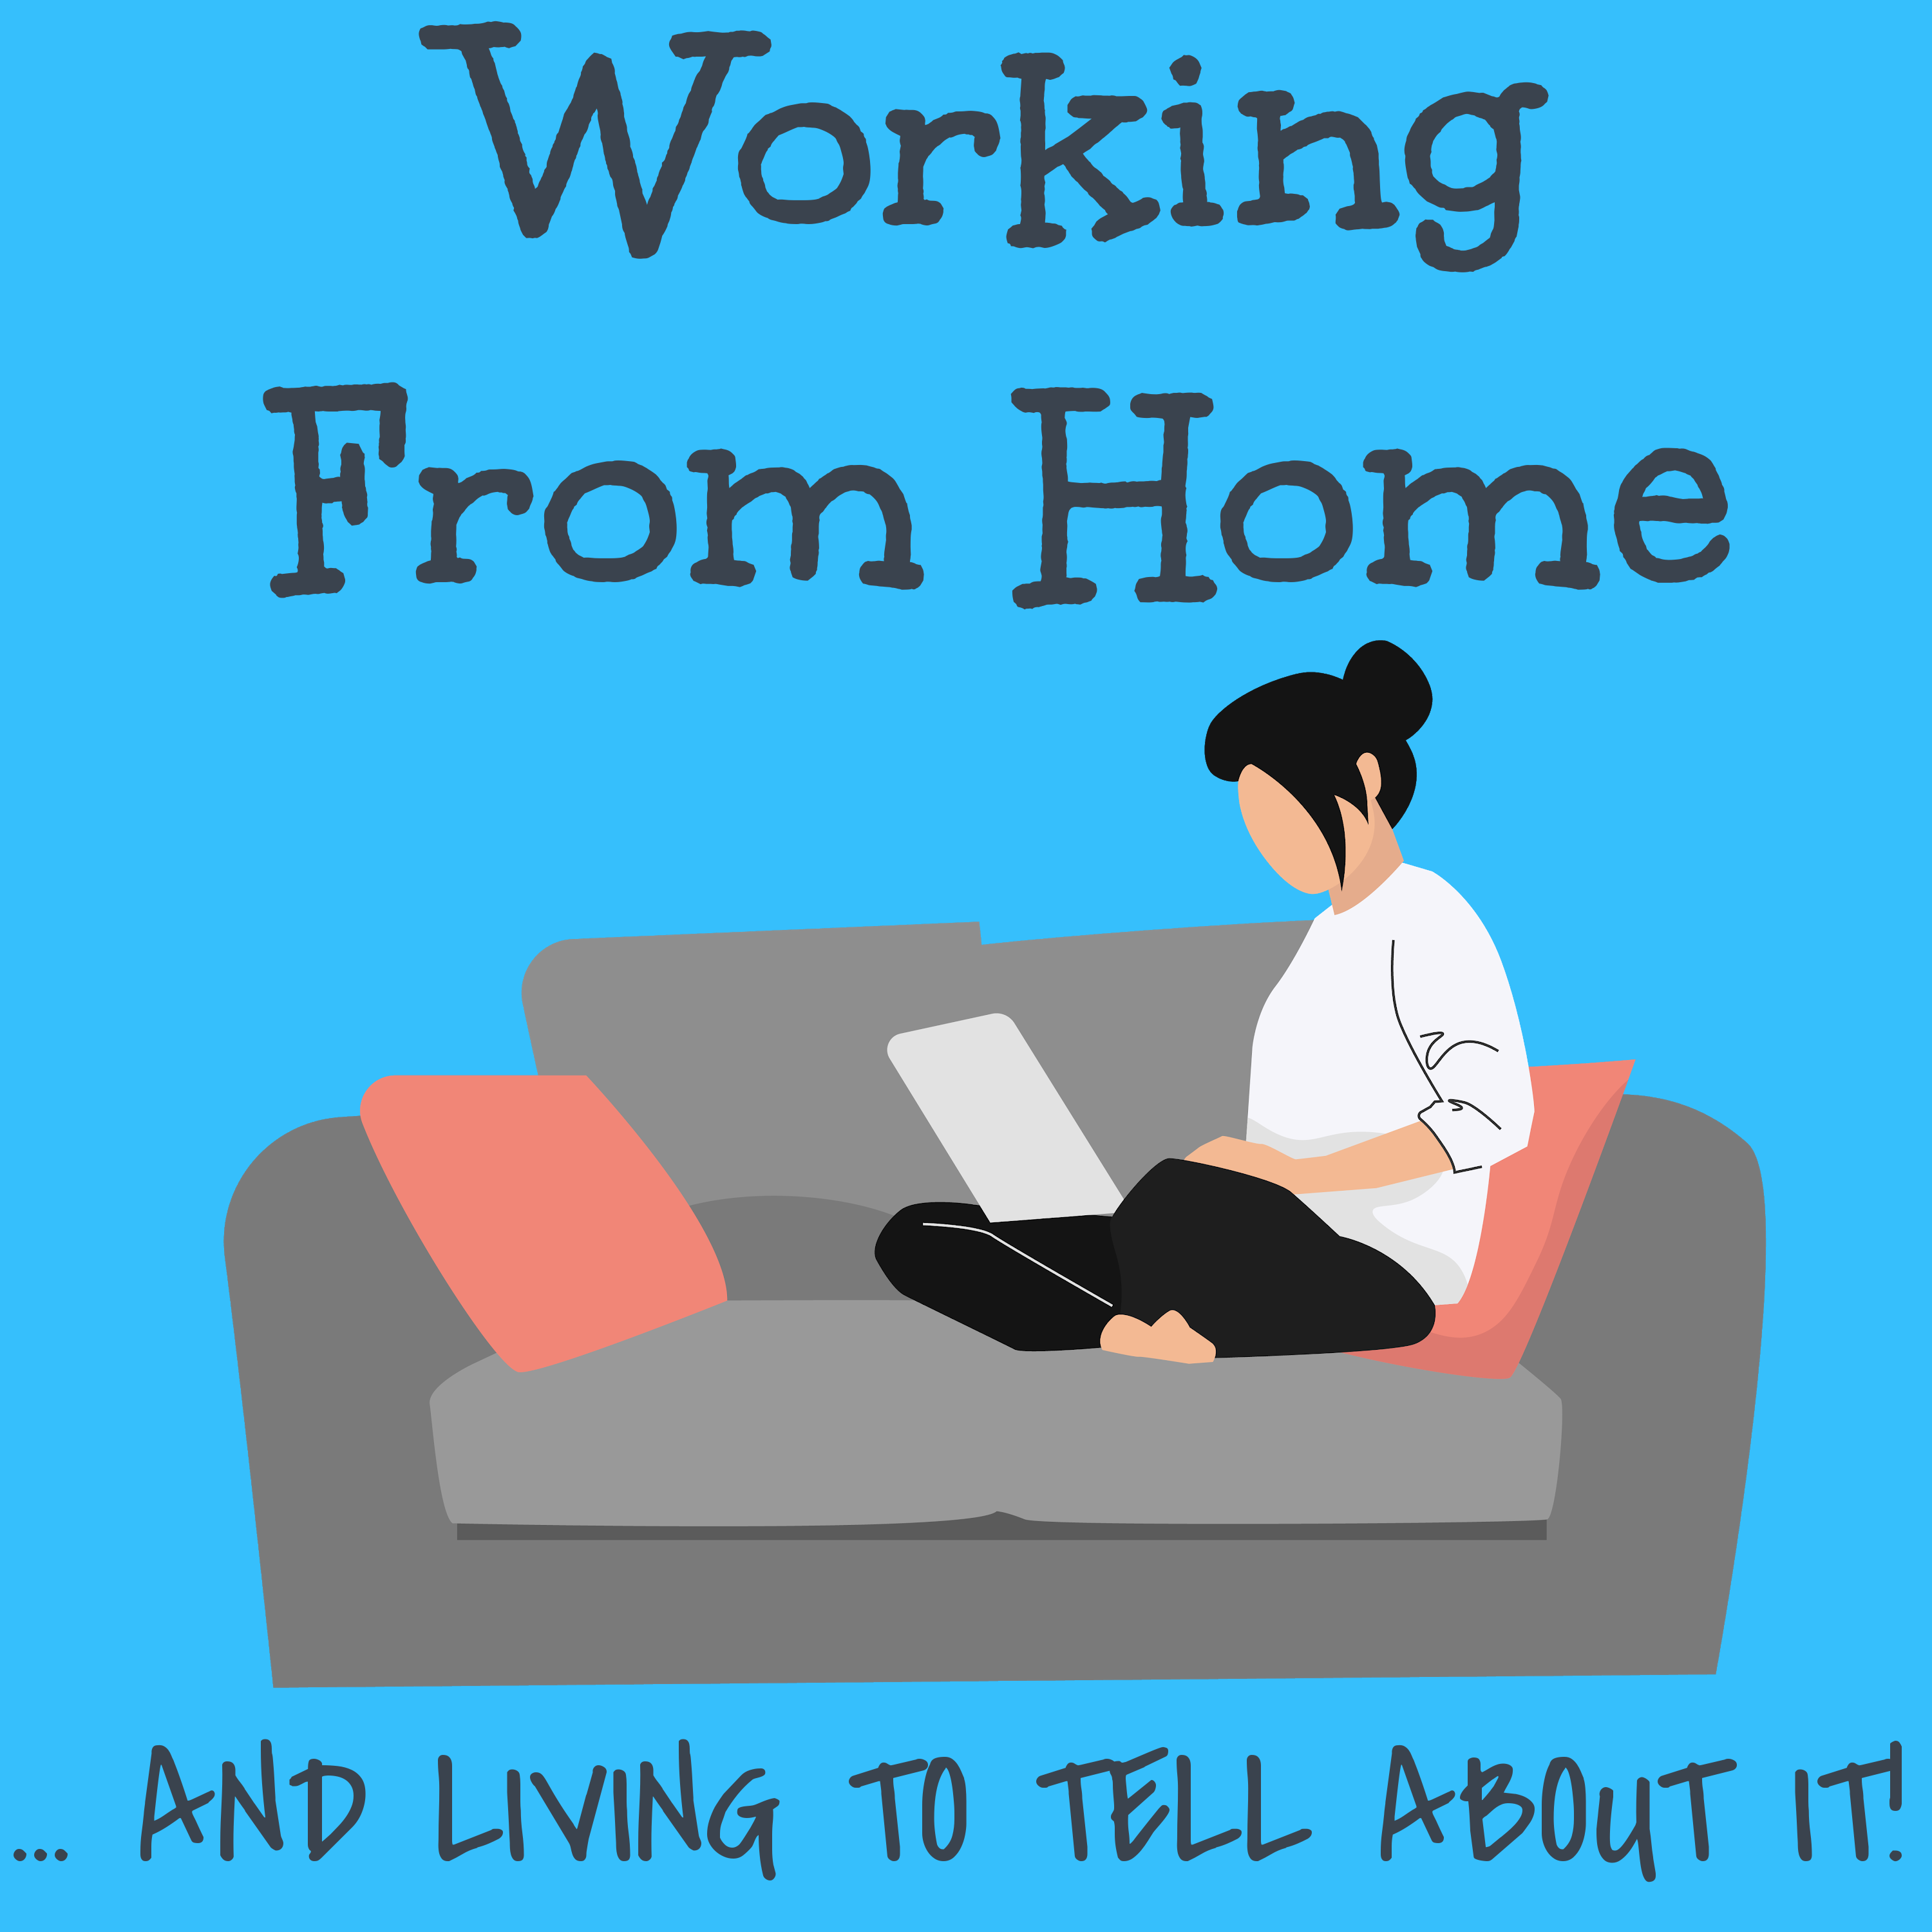 Working From Home ... And Living to Tell About It!